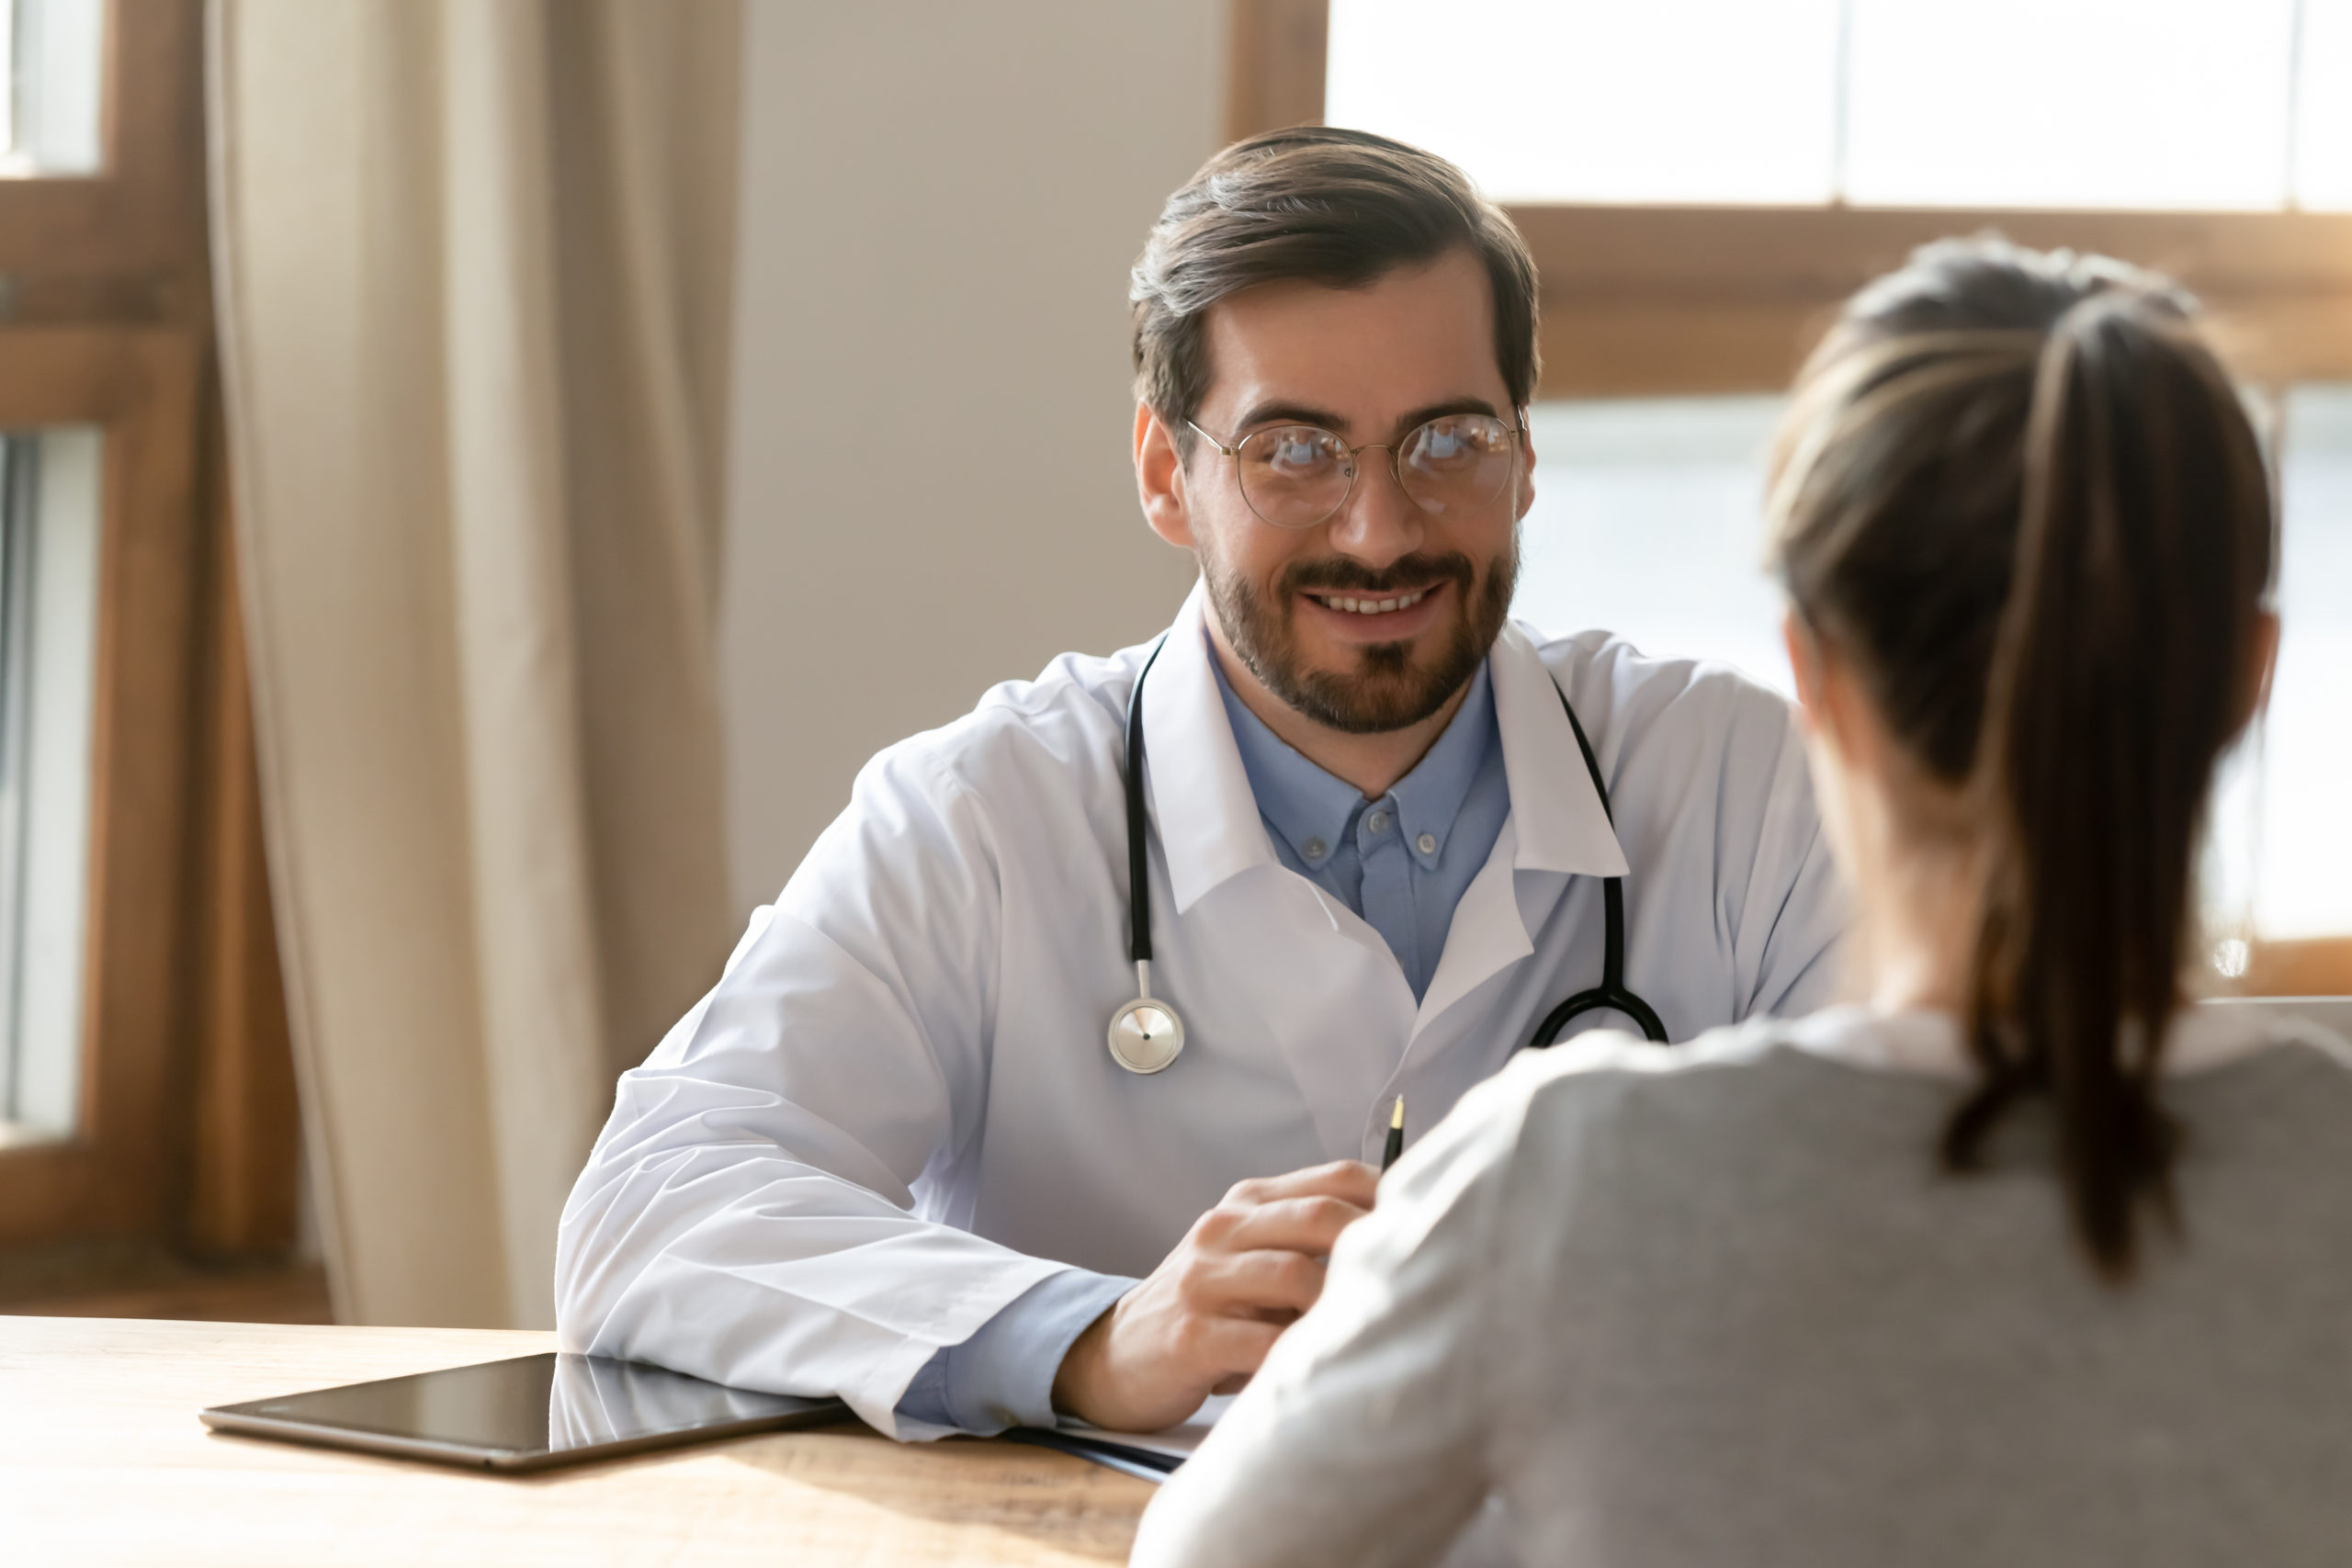  A woman and her doctor discuss her health during an in-person visit.